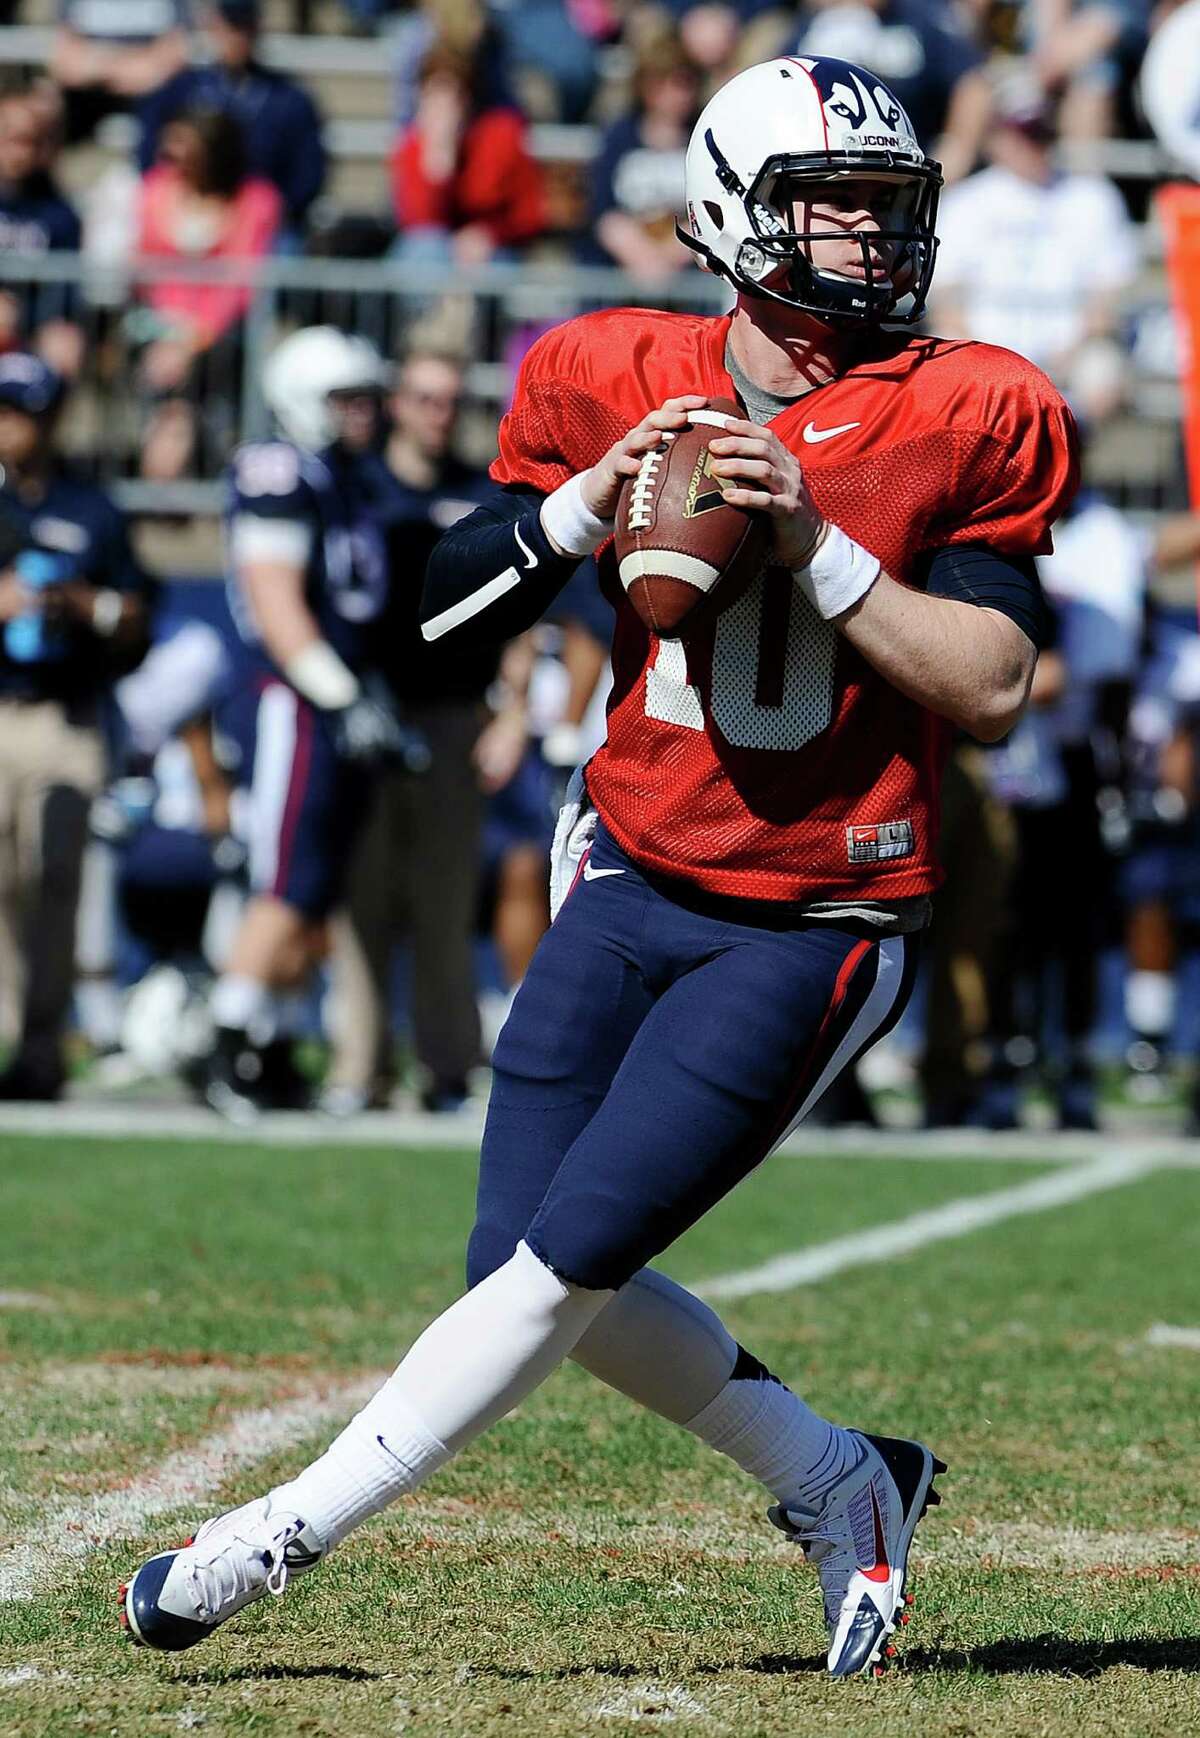 Connecticut quarterback Chandler Whitmer looks down field for a receiver during the first half of UConn's Blue-White spring NCAA college football game at Rentschler Field, Saturday, April 12, 2014, in East Hartford, Conn. (AP Photo/Jessica Hill)